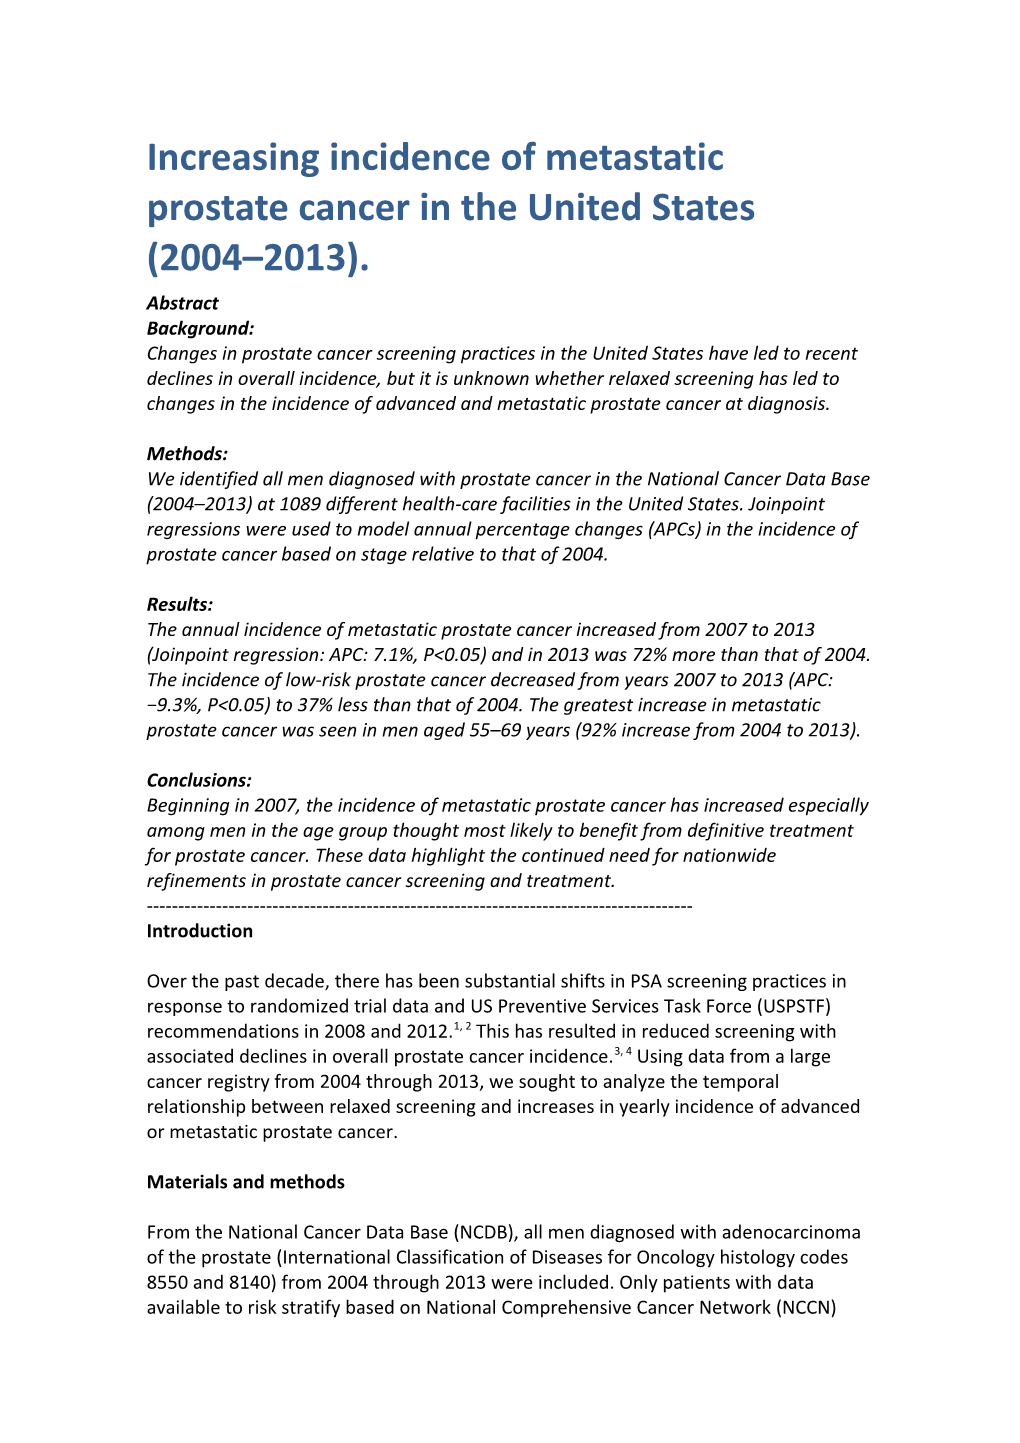 Increasing Incidence of Metastatic Prostate Cancer in the United States (2004 2013)